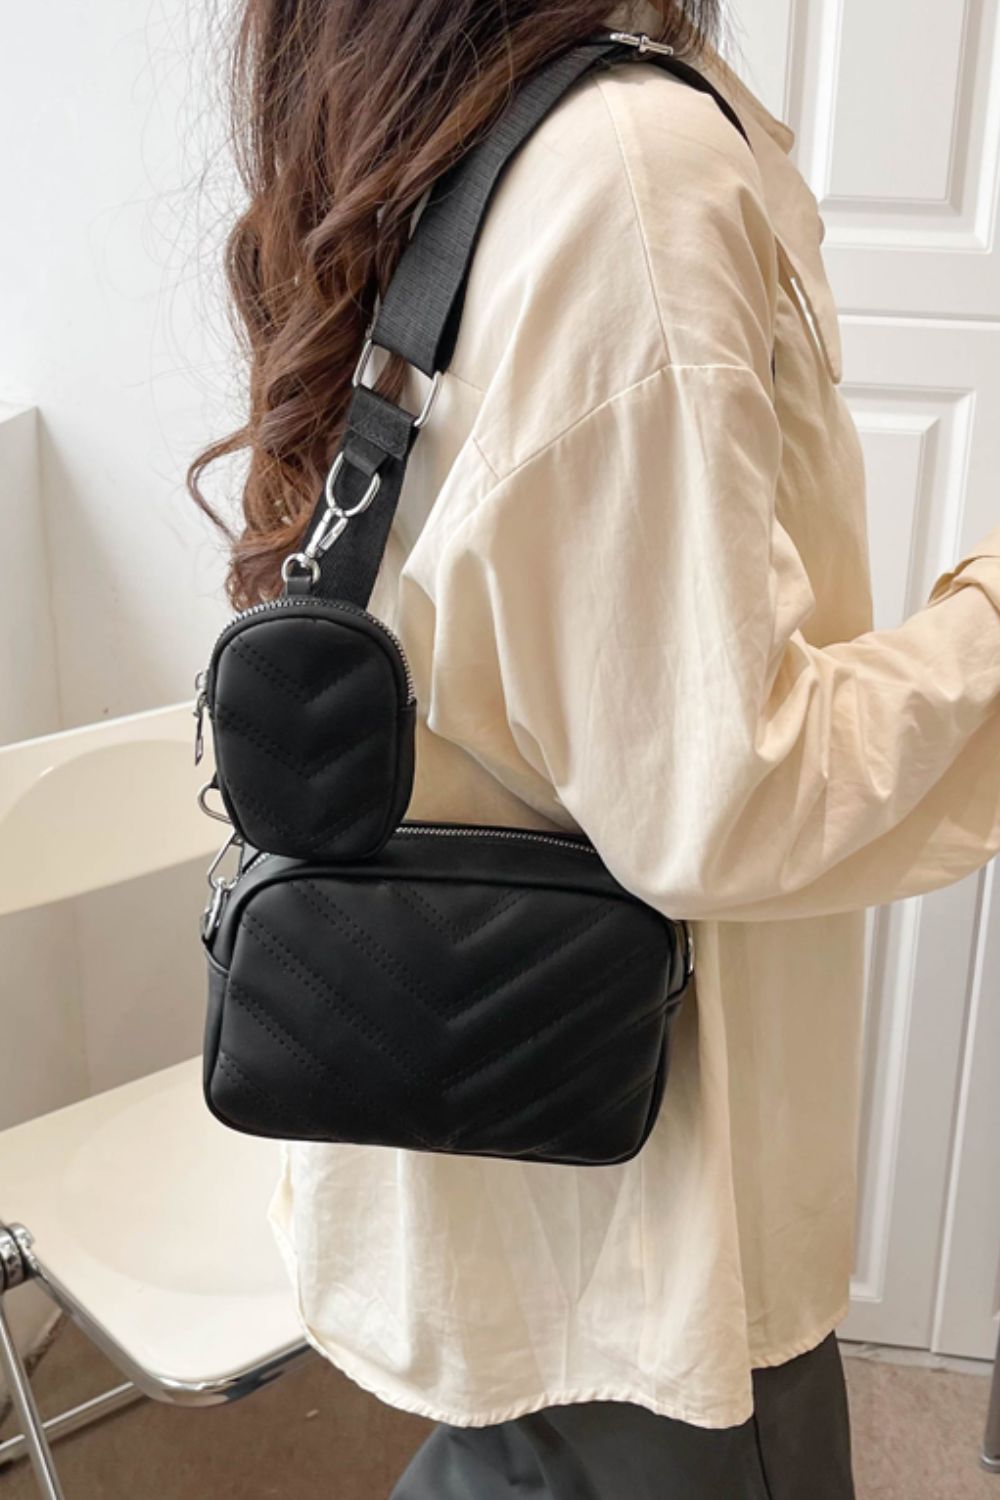 pu leather shoulder bag with small purse, black, worn on a woman's shoulder